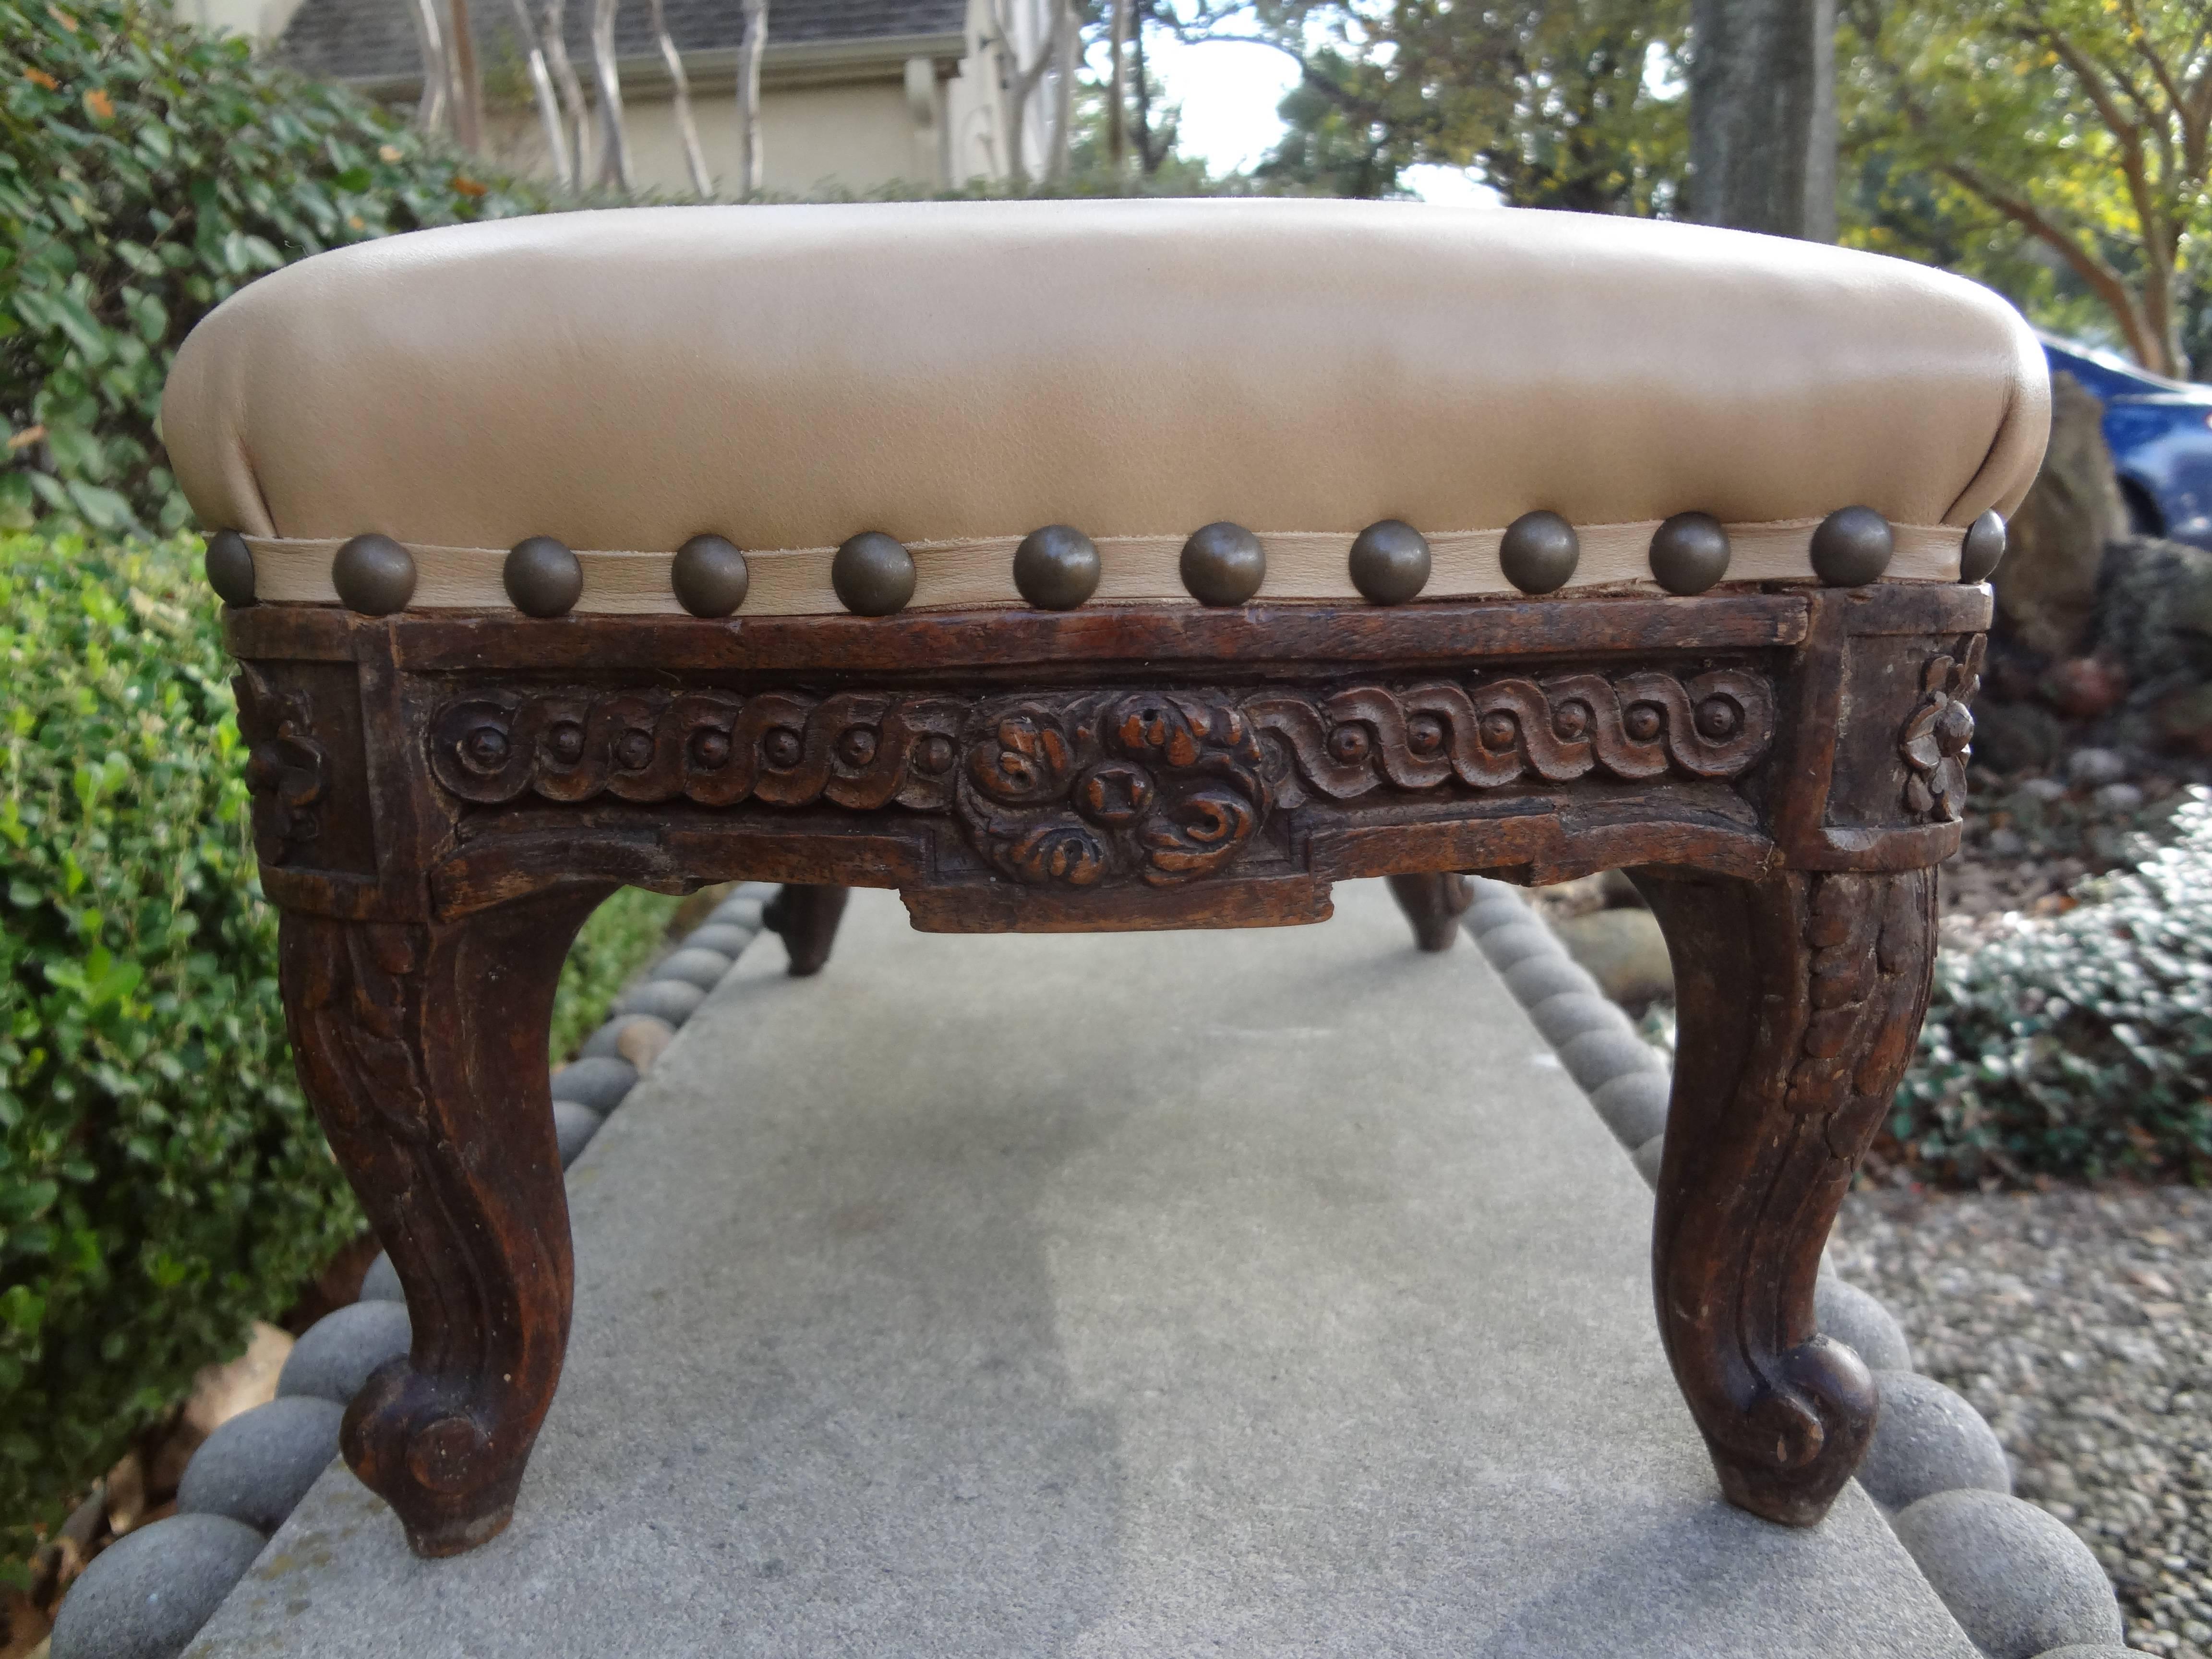 Well carved 19th century French Louis XV-XVI style foot stool or ottoman/tabouret. Newly upholstered in leather with spaced brass nail head detail. Great table top piece to display a prized possession!